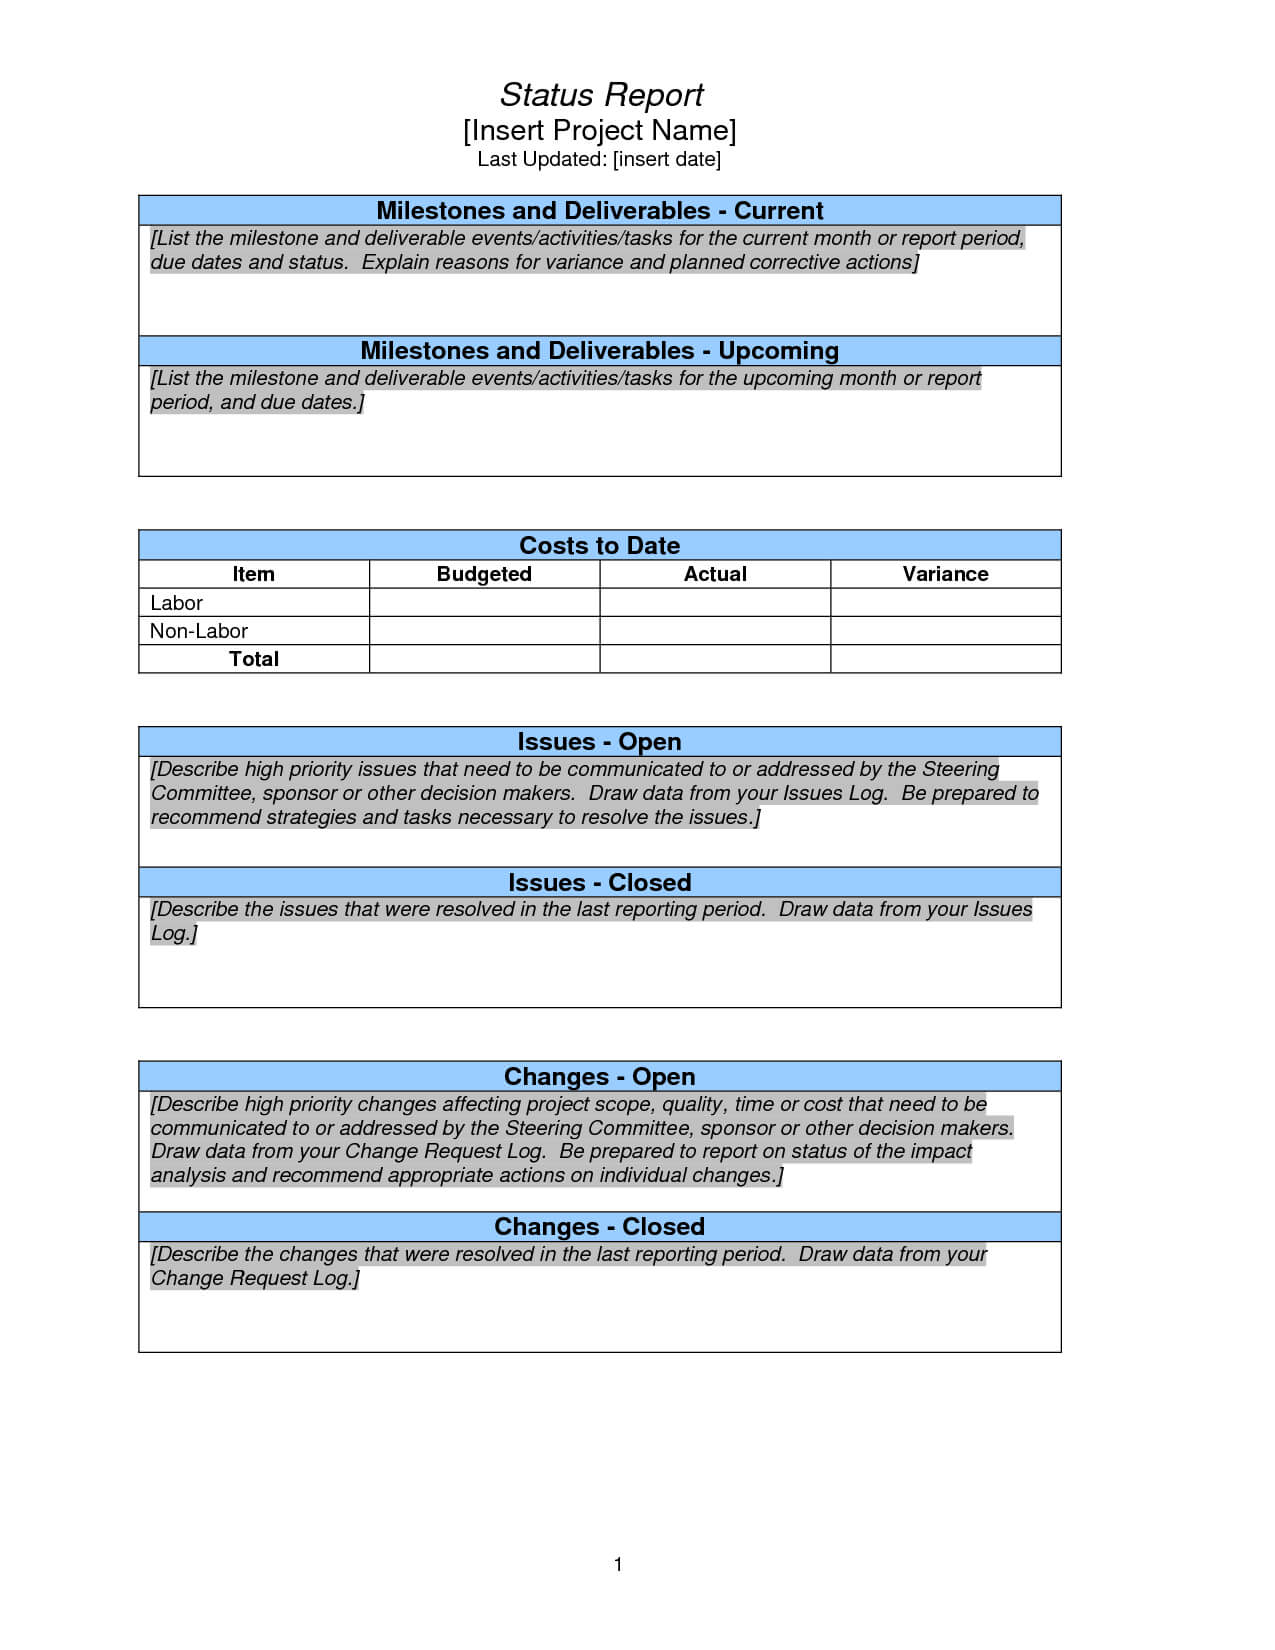 Project Status Report Sample | Project Status Report, Report Inside Project Management Final Report Template